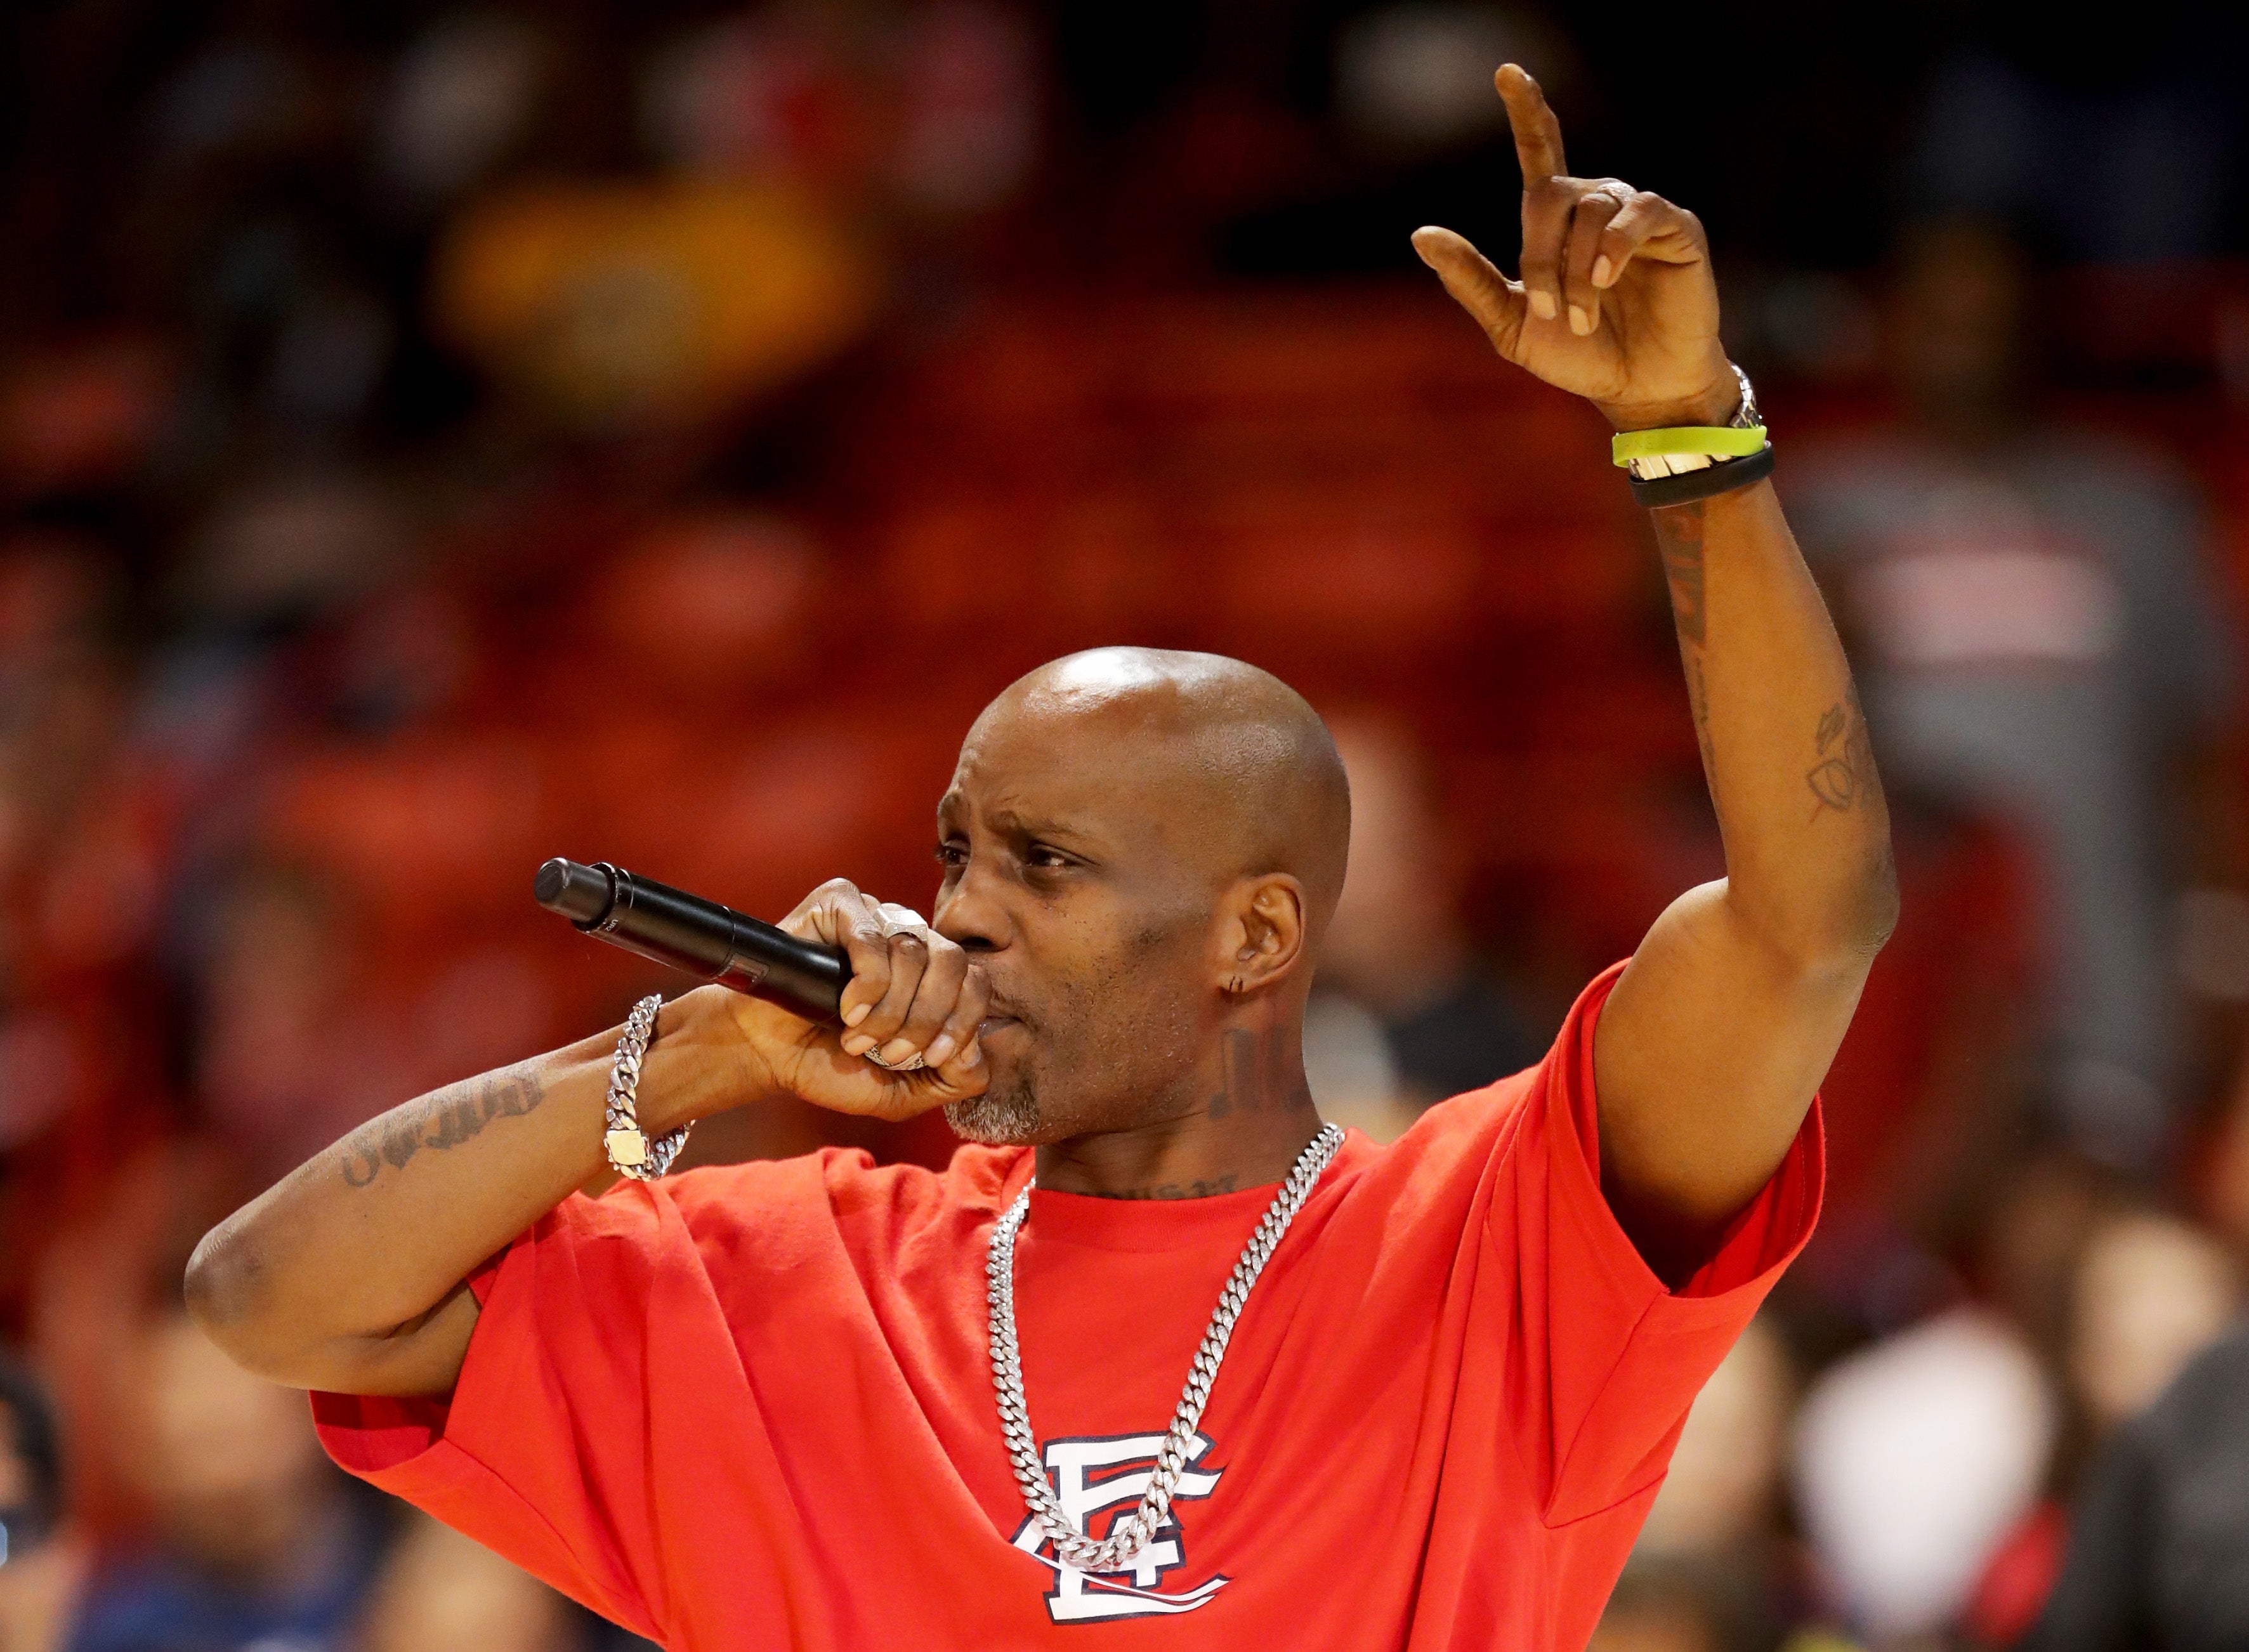 DMX Released A 'Rudolph the Red-Nosed Reindeer' Remix Because Why Not
